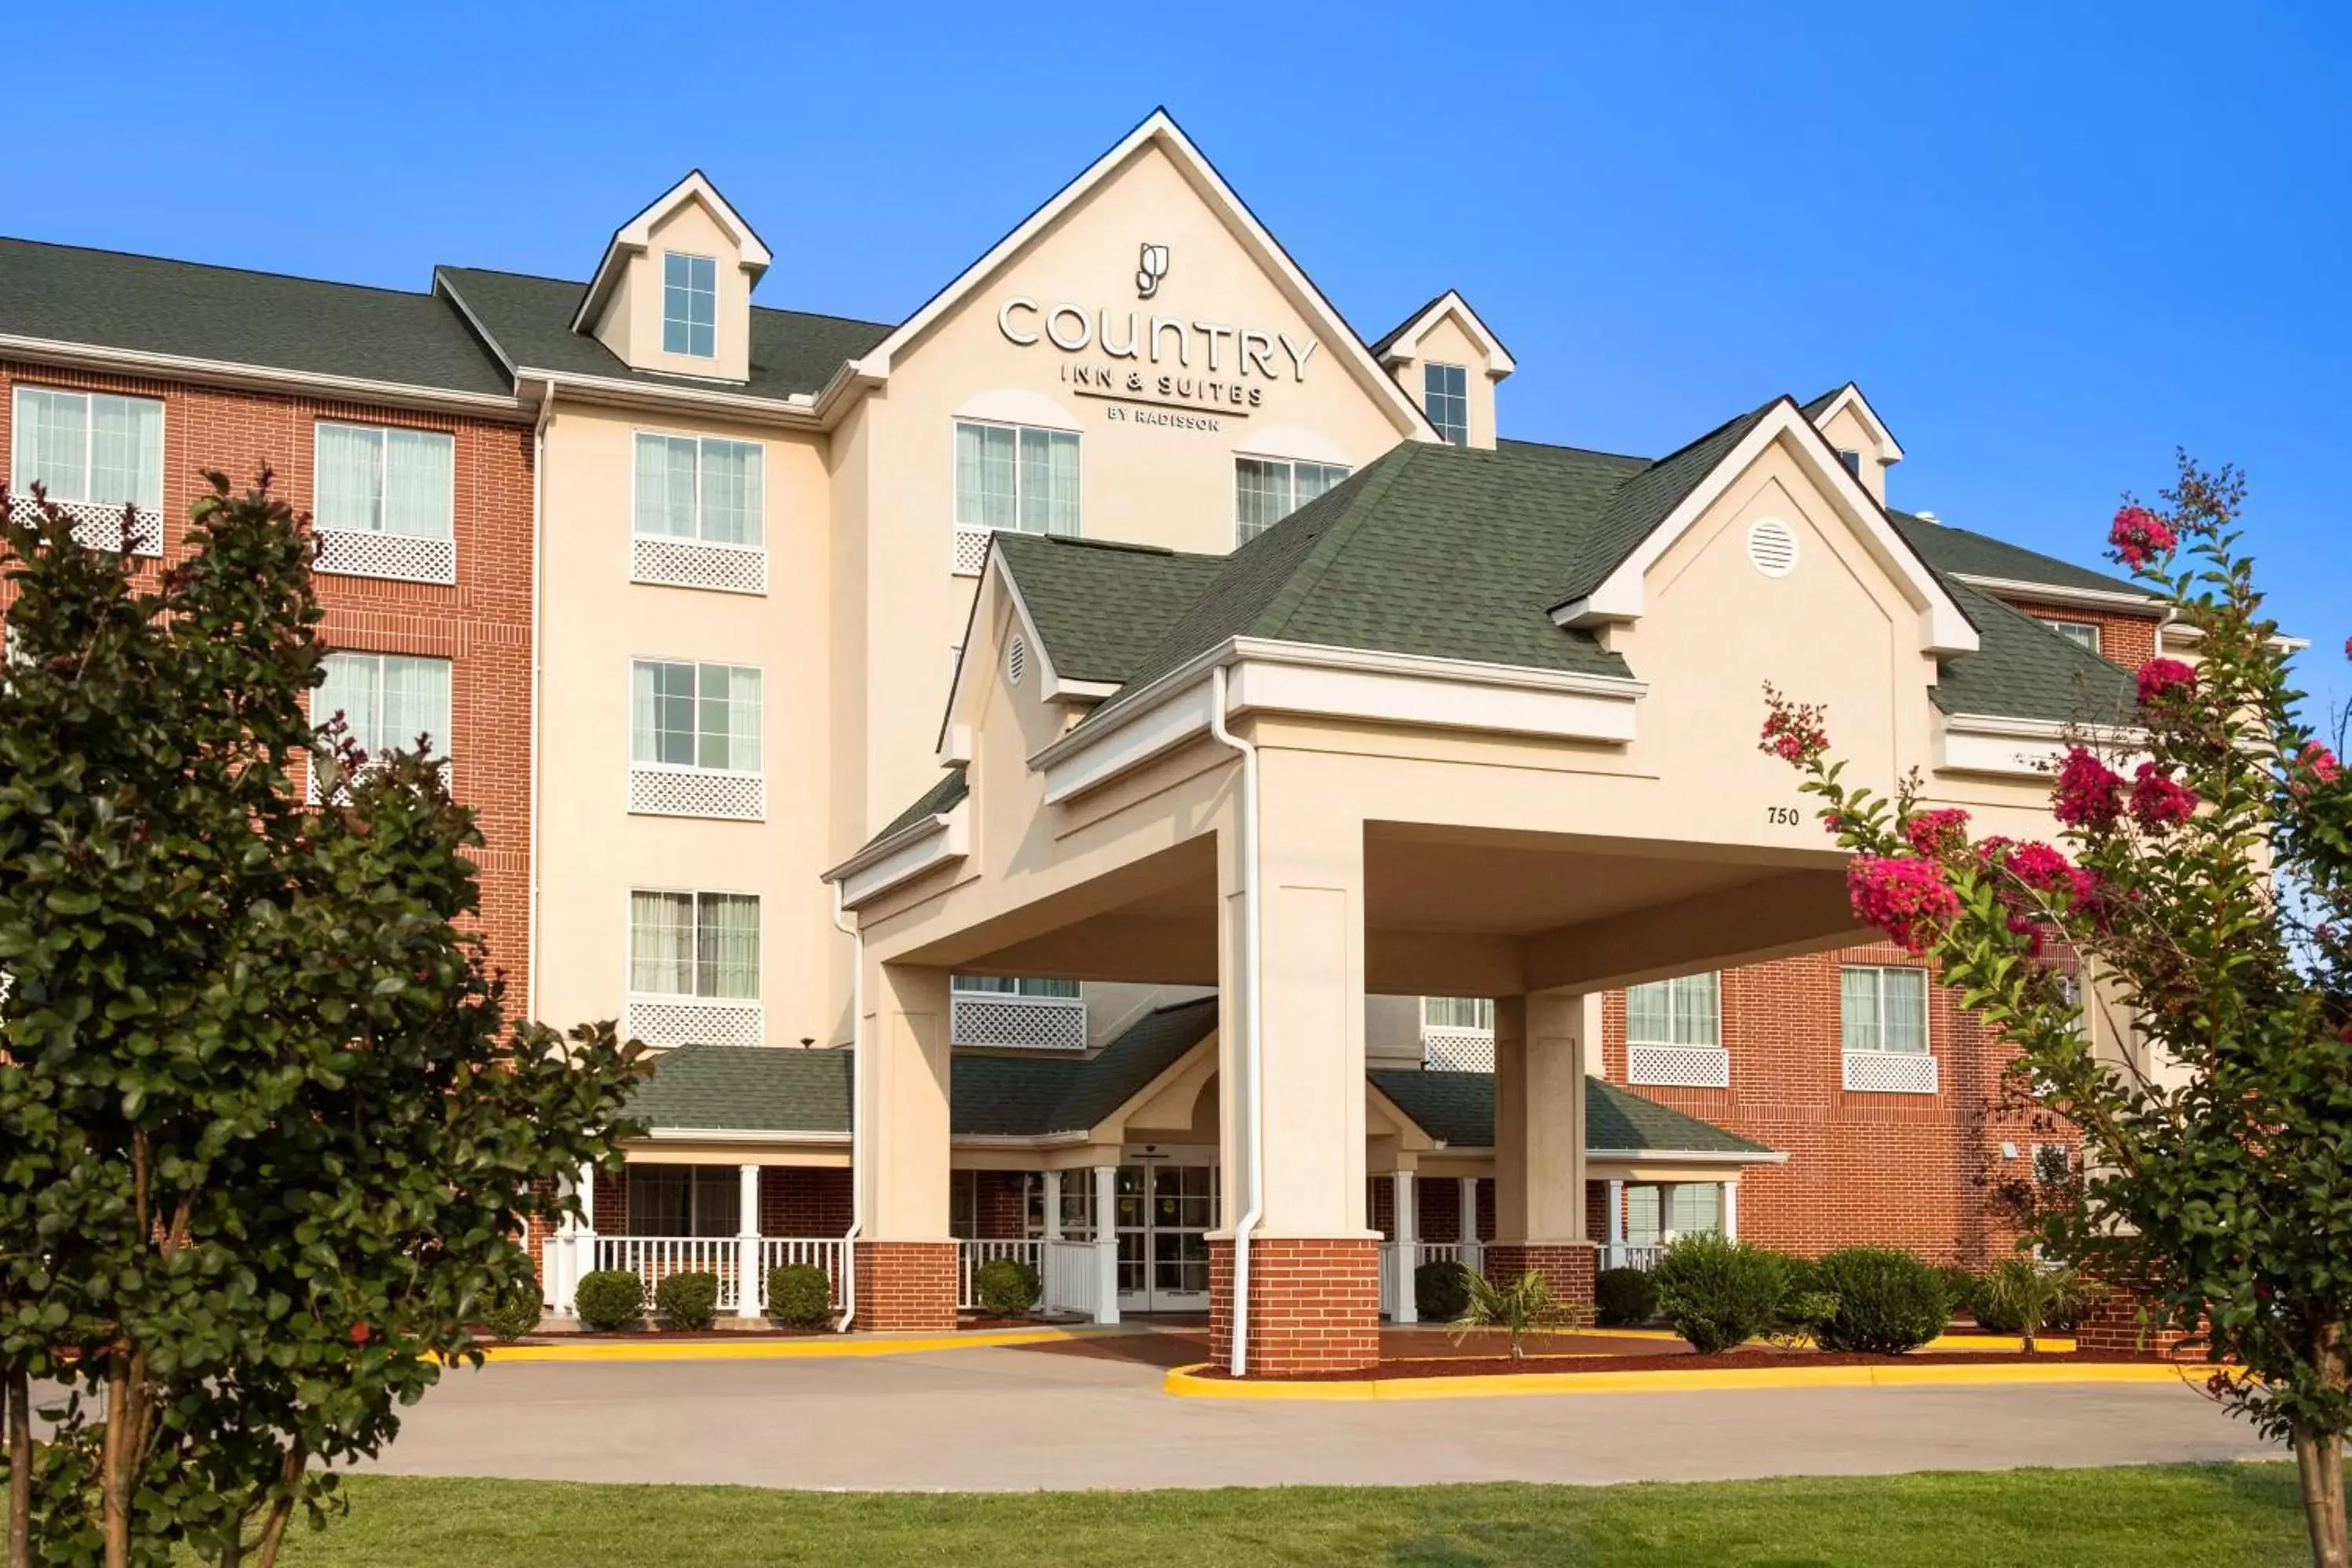 Property Building in Country Inn & Suites by Radisson, Conway, AR